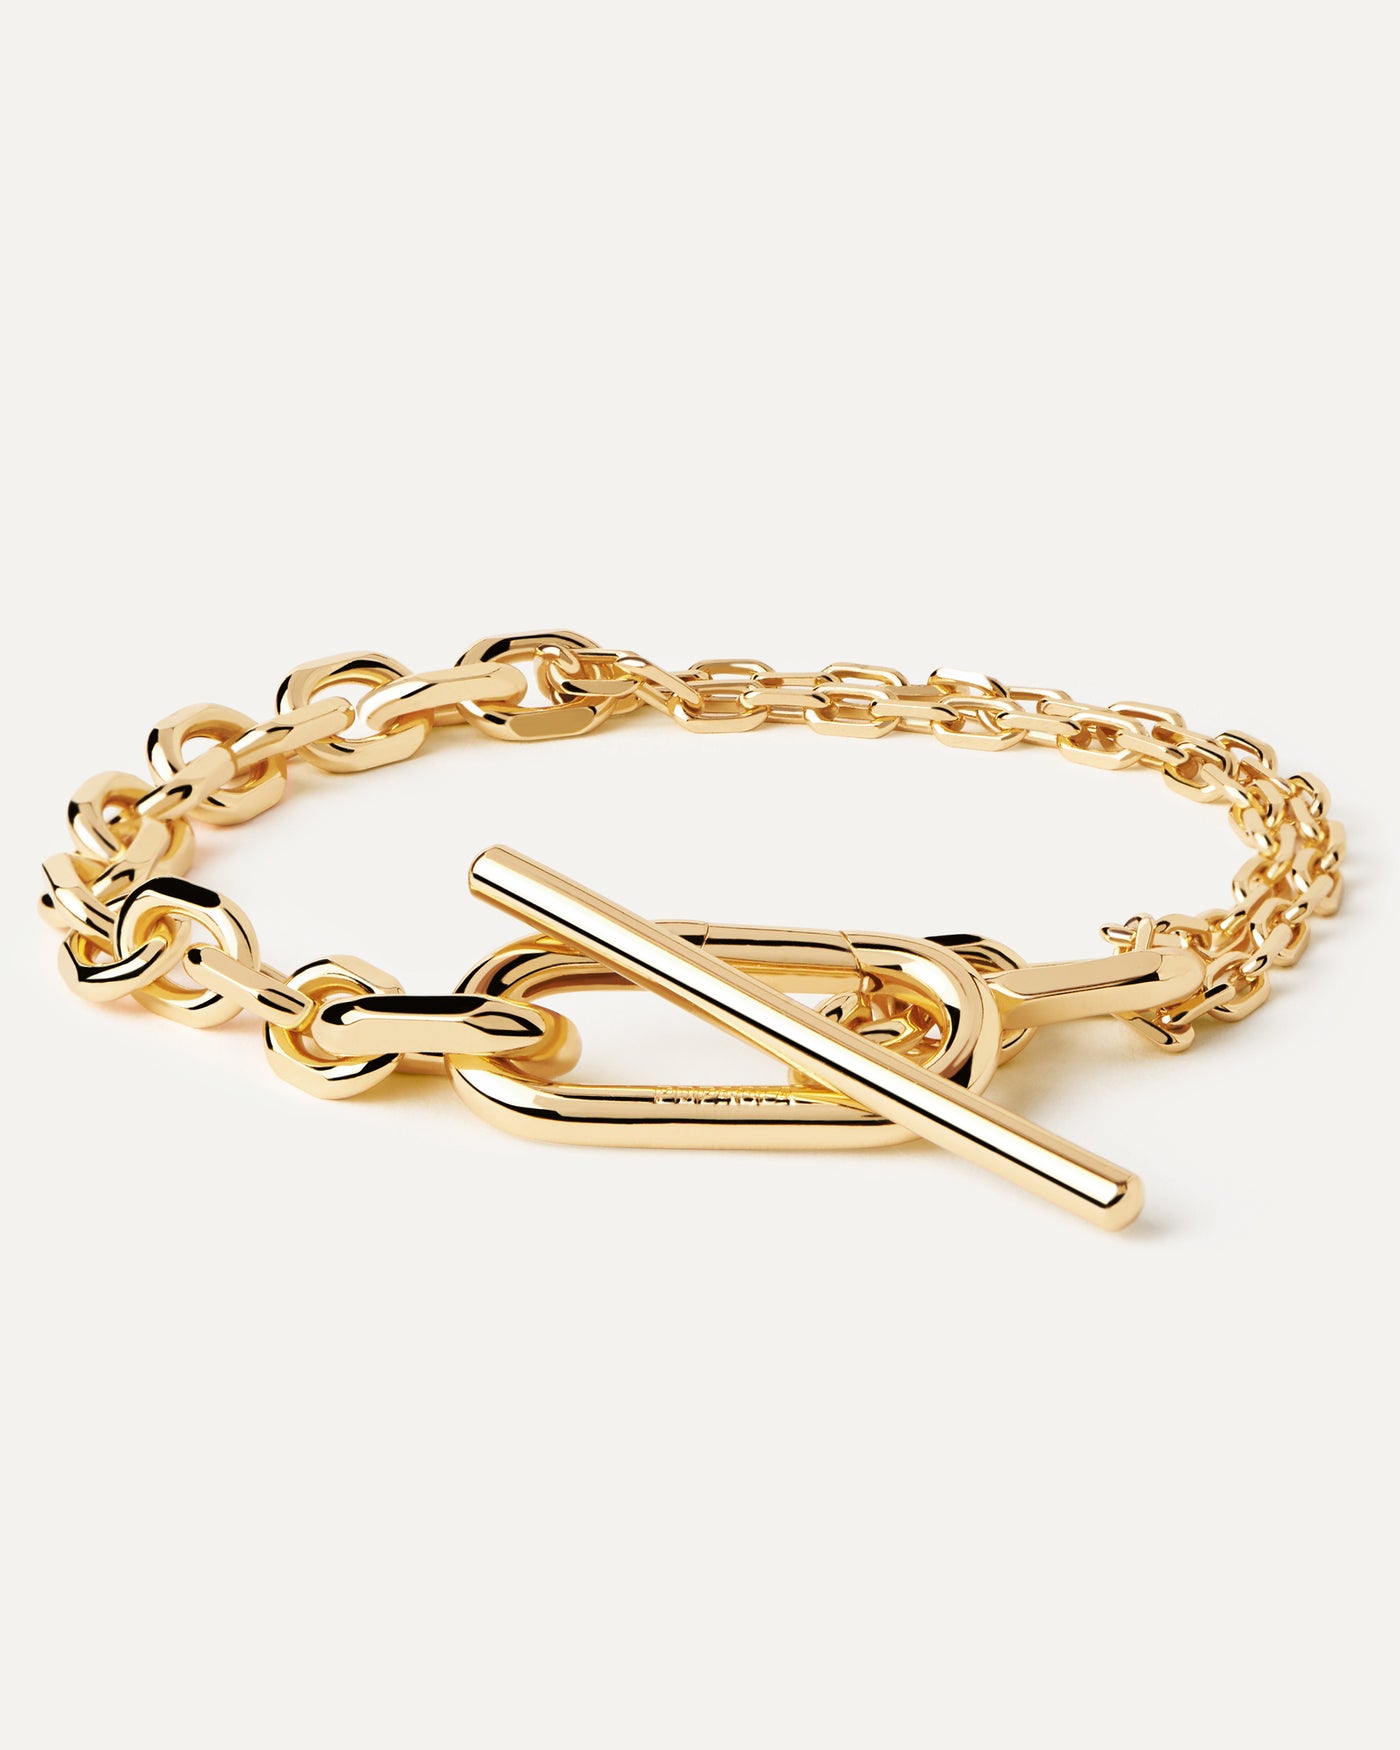 2023 Selection | Vesta Chain Bracelet. Gold-plated double chain T-bar bracelet with bold clasp and asymmetrical links. Get the latest arrival from PDPAOLA. Place your order safely and get this Best Seller. Free Shipping.